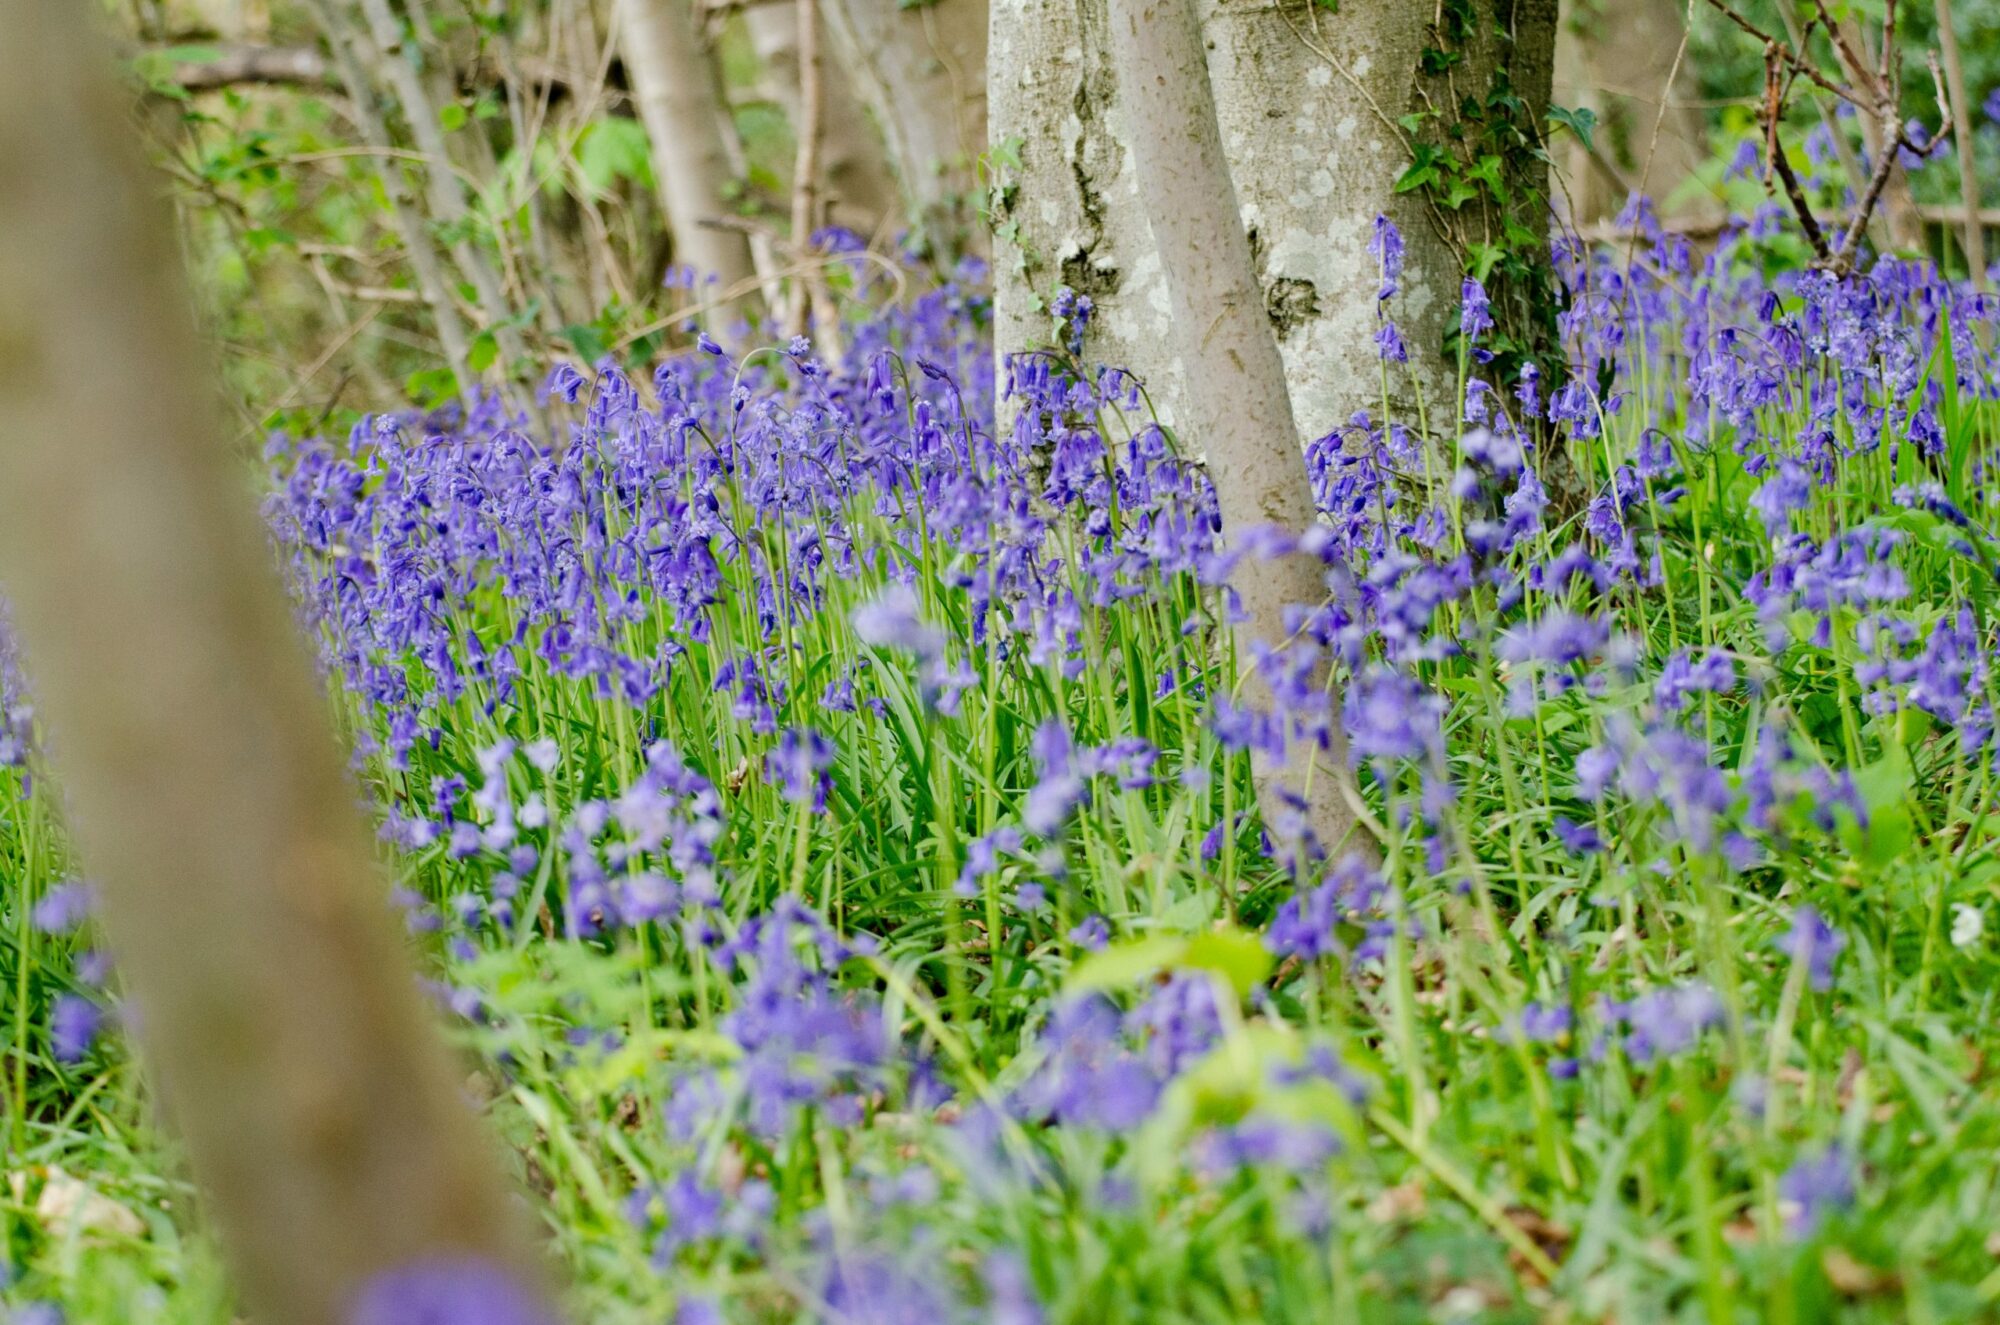 Image name Bluebells Josh Raper Conservation Media 5 scaled 1 the 11 image from the post Walking, Wellbeing and Wildlife in Yorkshire.com.